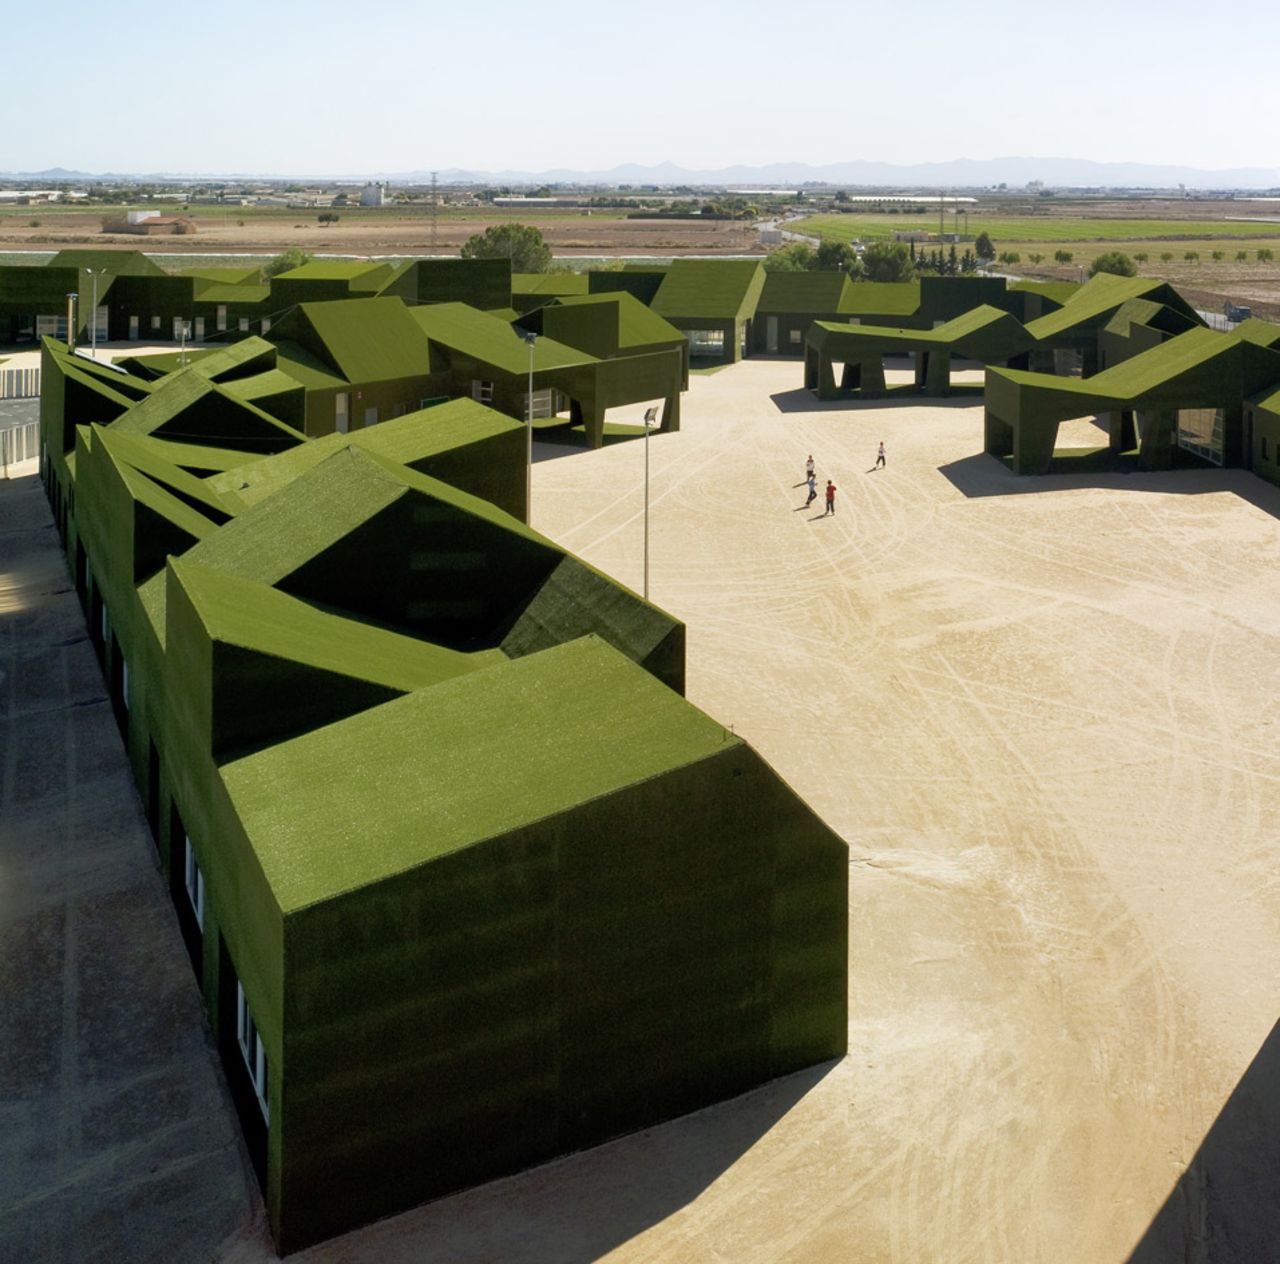 This elementary and primary public school, located in the small town of Roldán, Spain, is wrapped in a green carpet of artificial turf and built on top of a two-meter high perimeter wall to protect it from the region's heavy rains. 